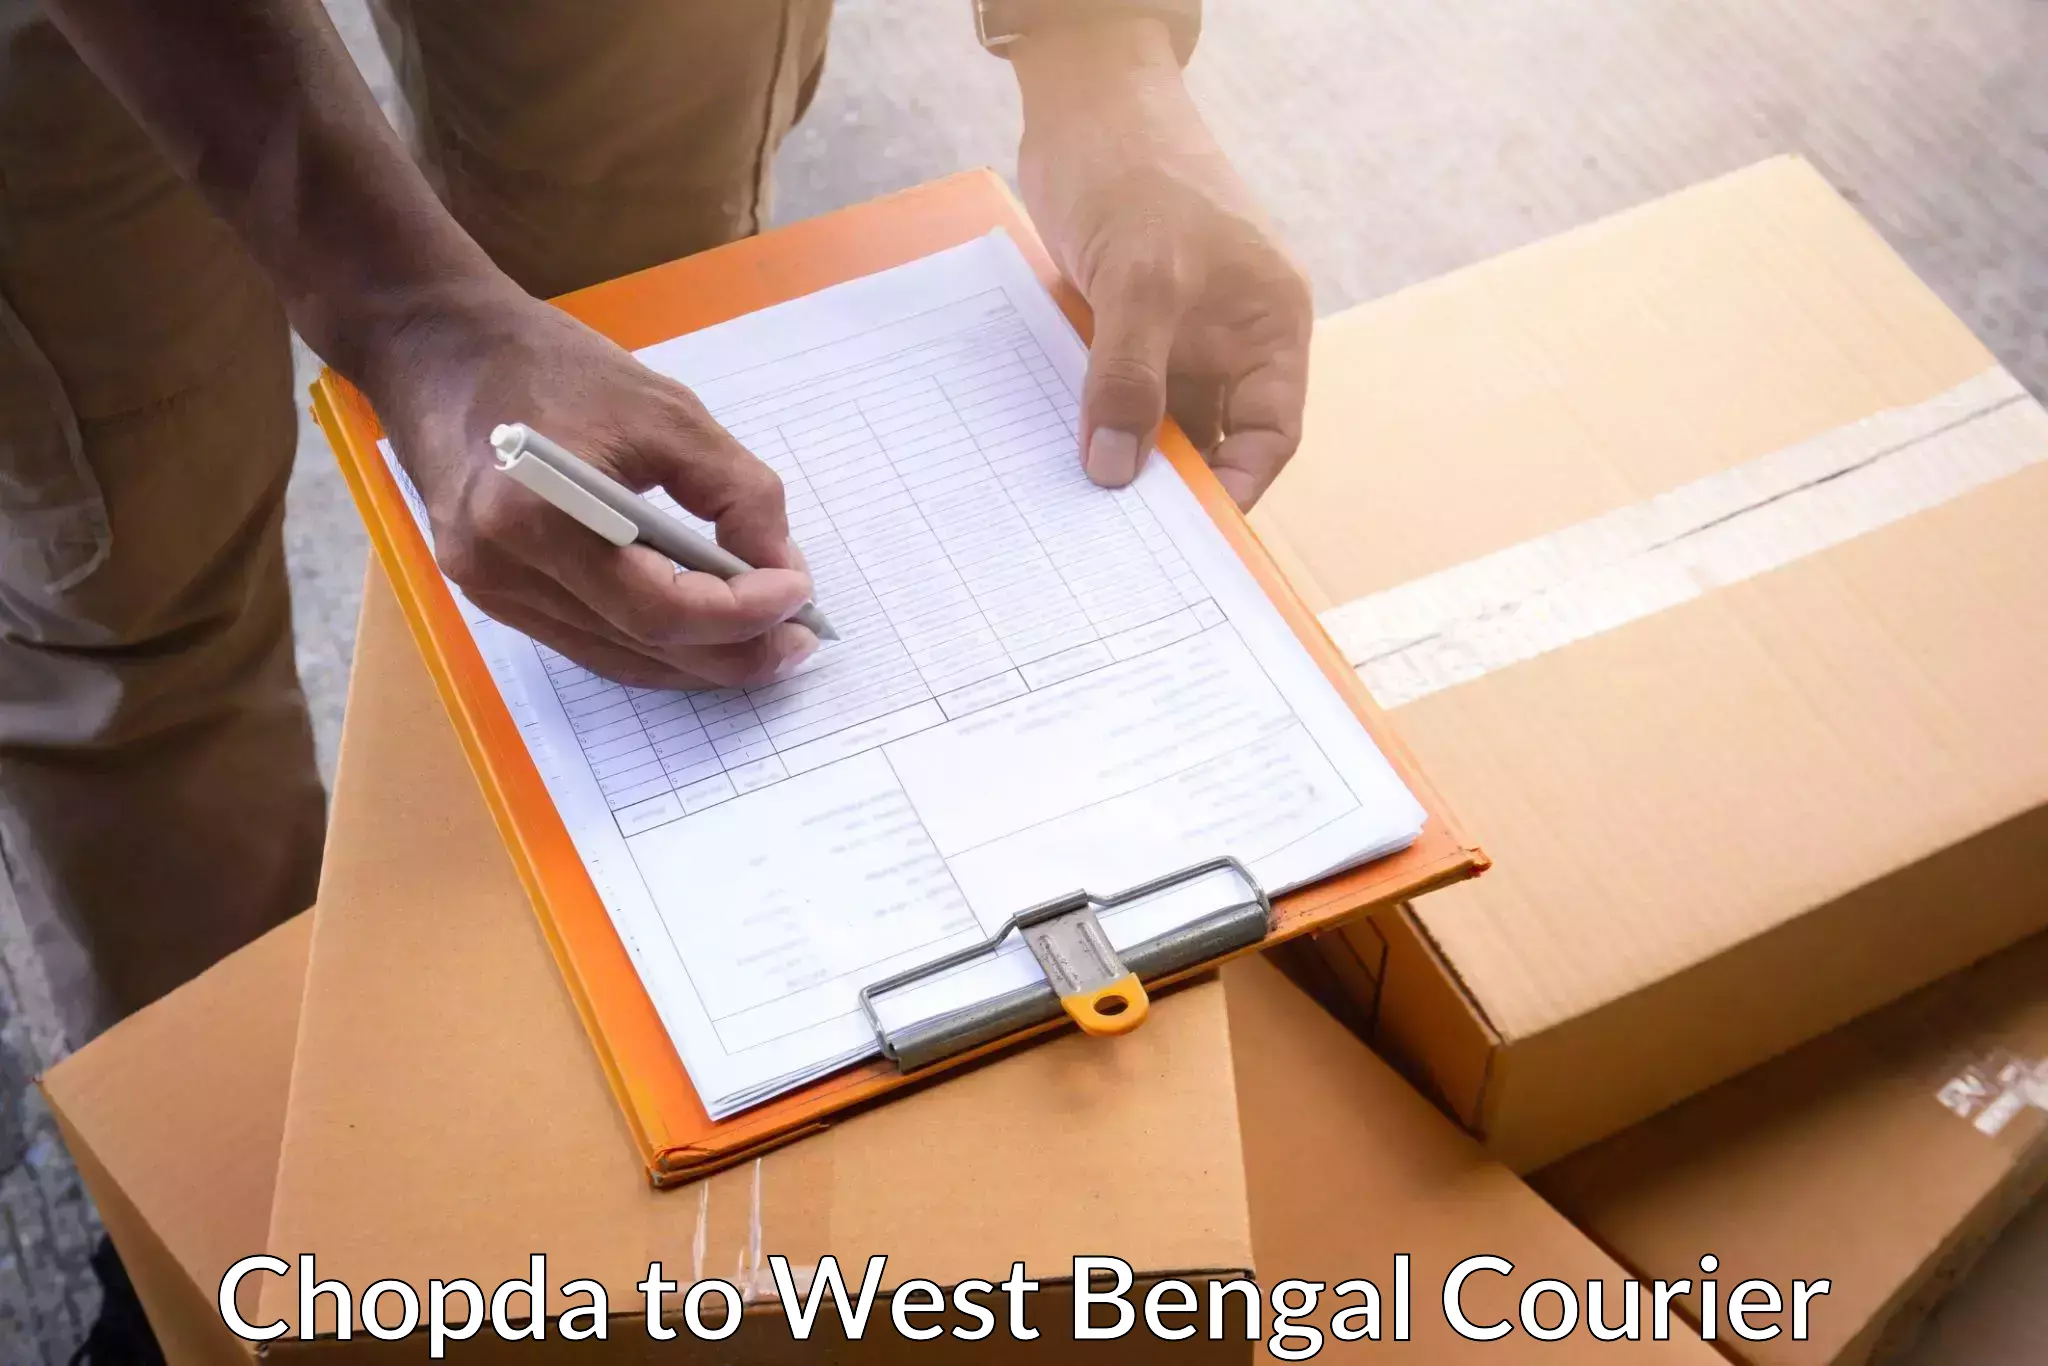 Urgent courier needs in Chopda to Dalkhola